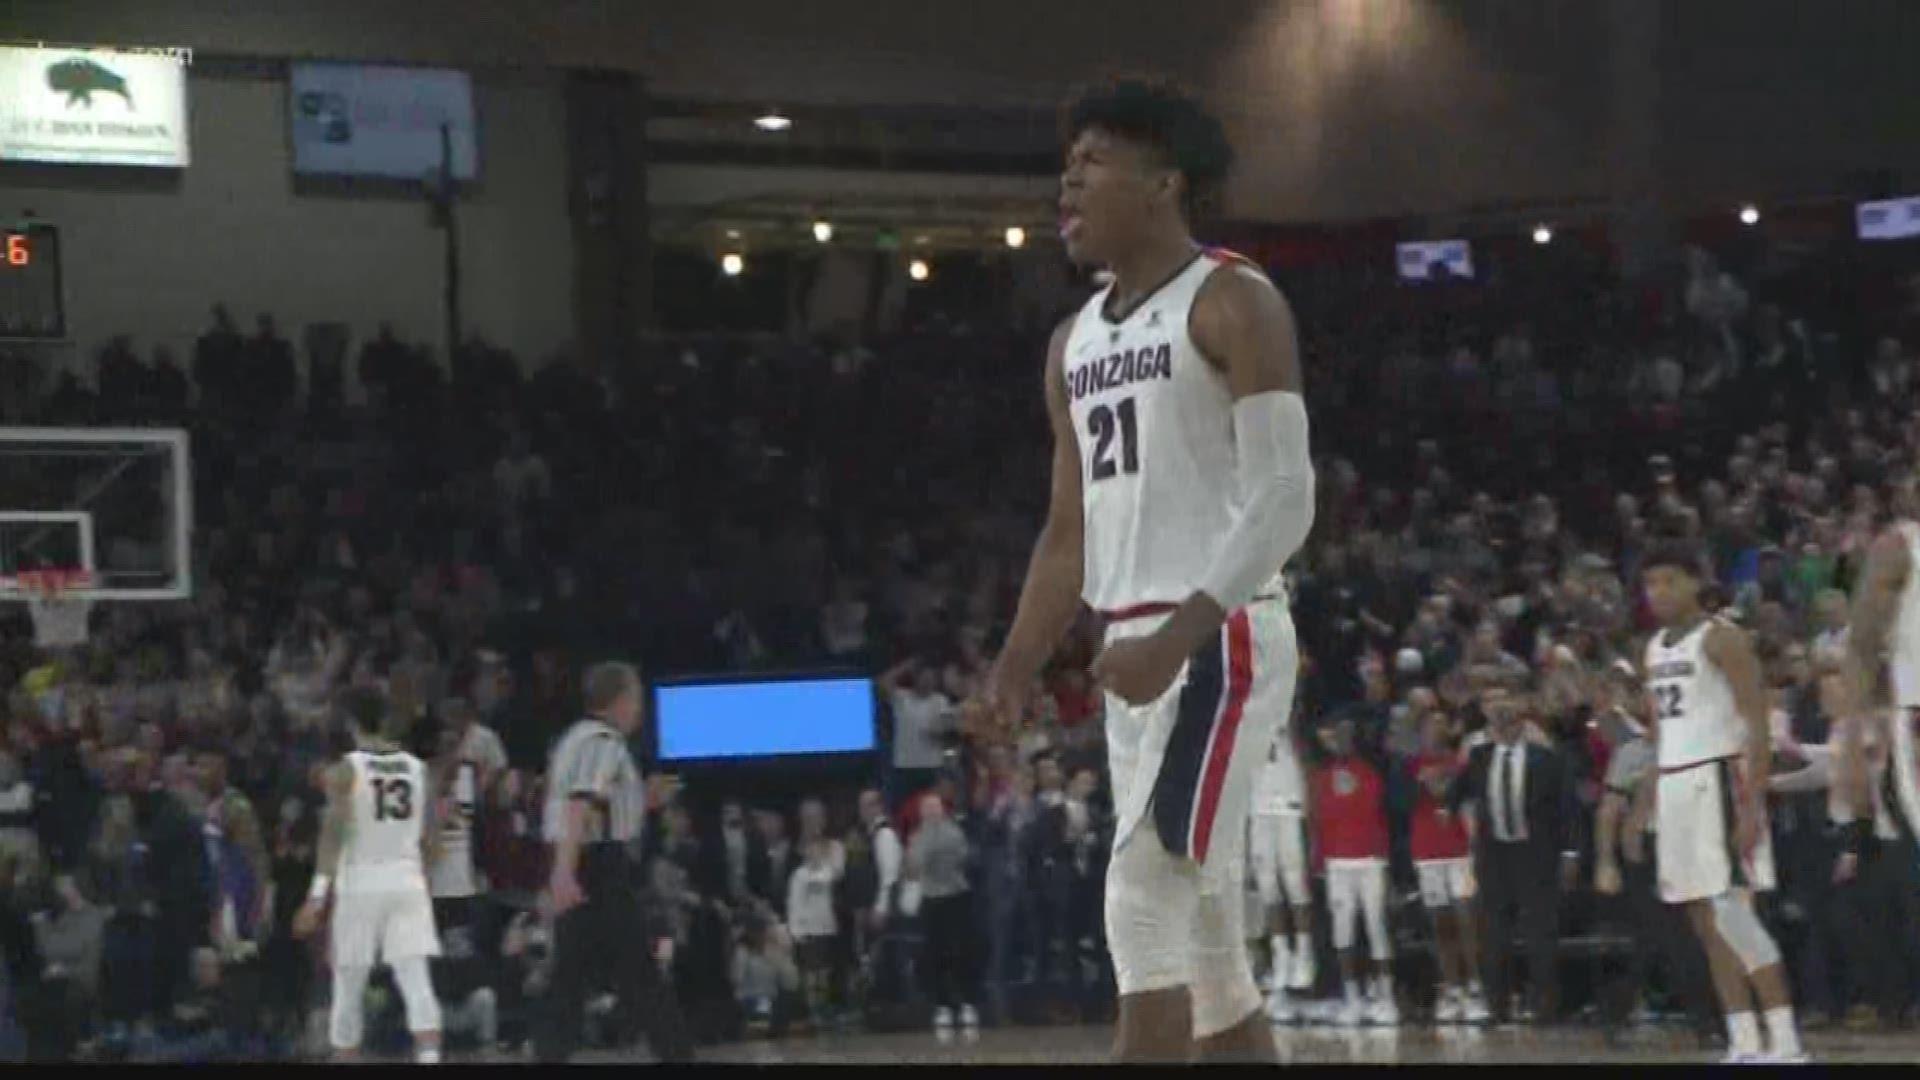 The Zags defeat their in state rival Washington for the third straight time.